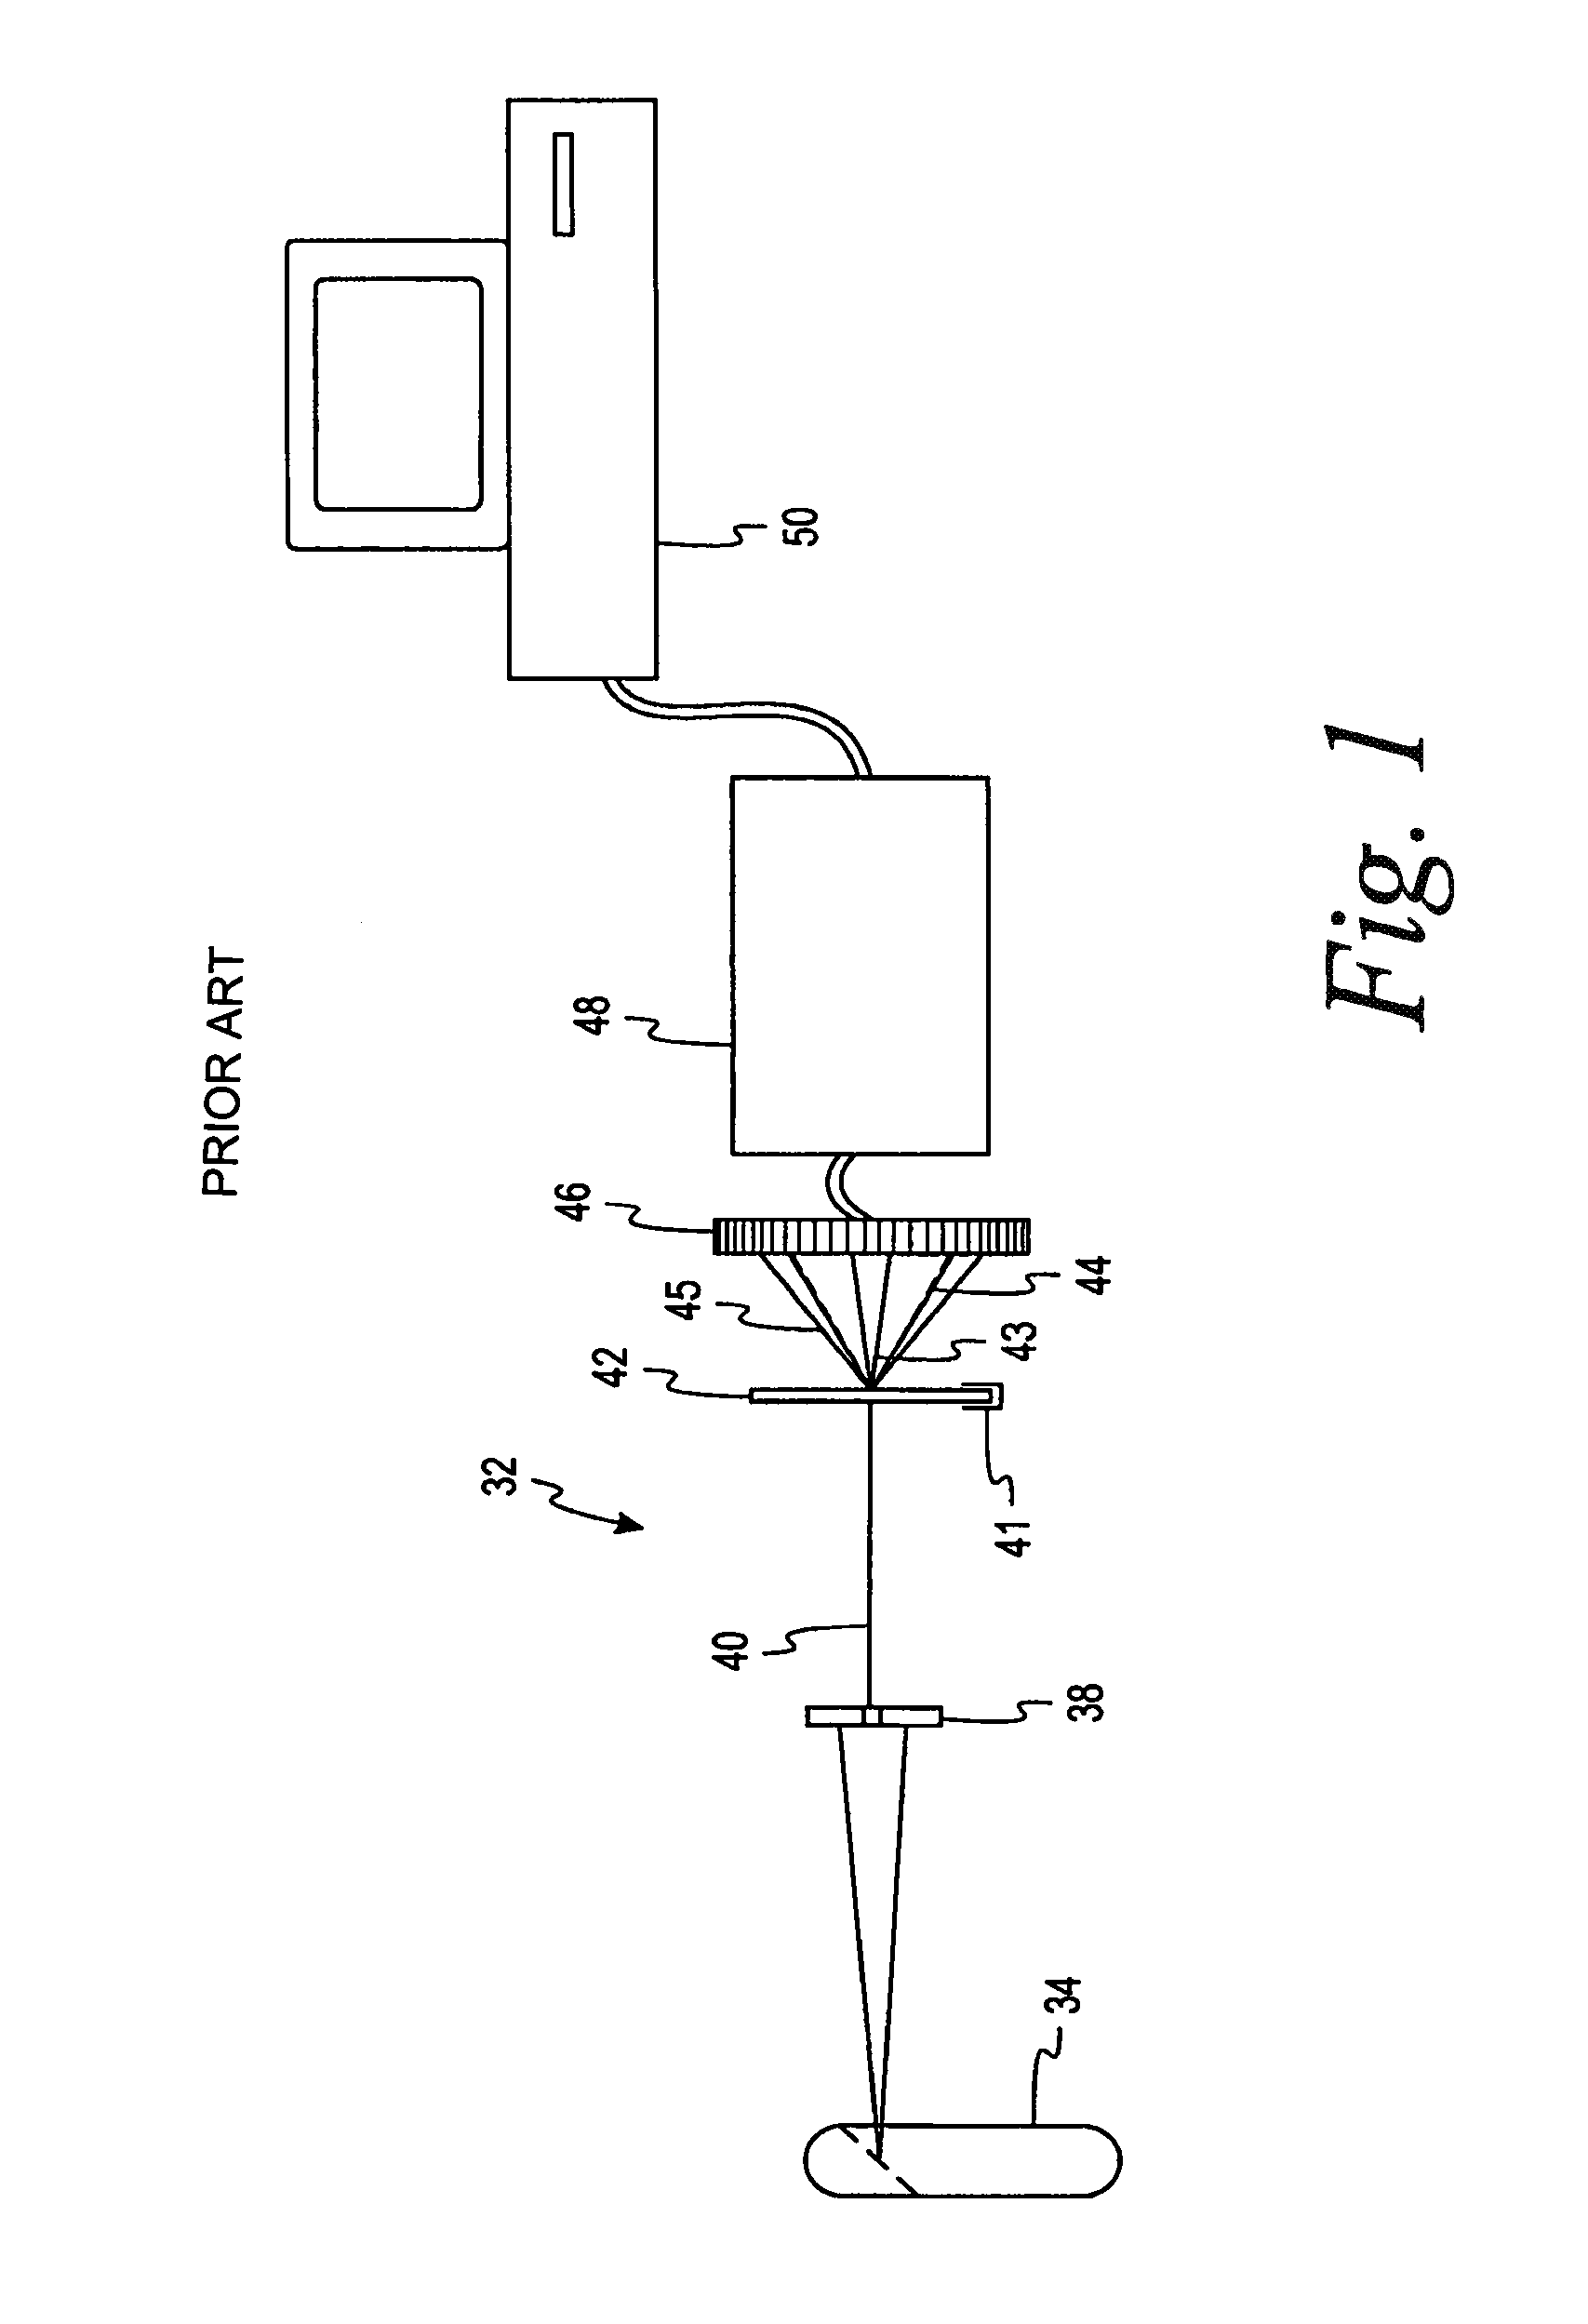 Instrument and method for X-ray diffraction, fluorescence, and crystal texture analysis without sample preparation